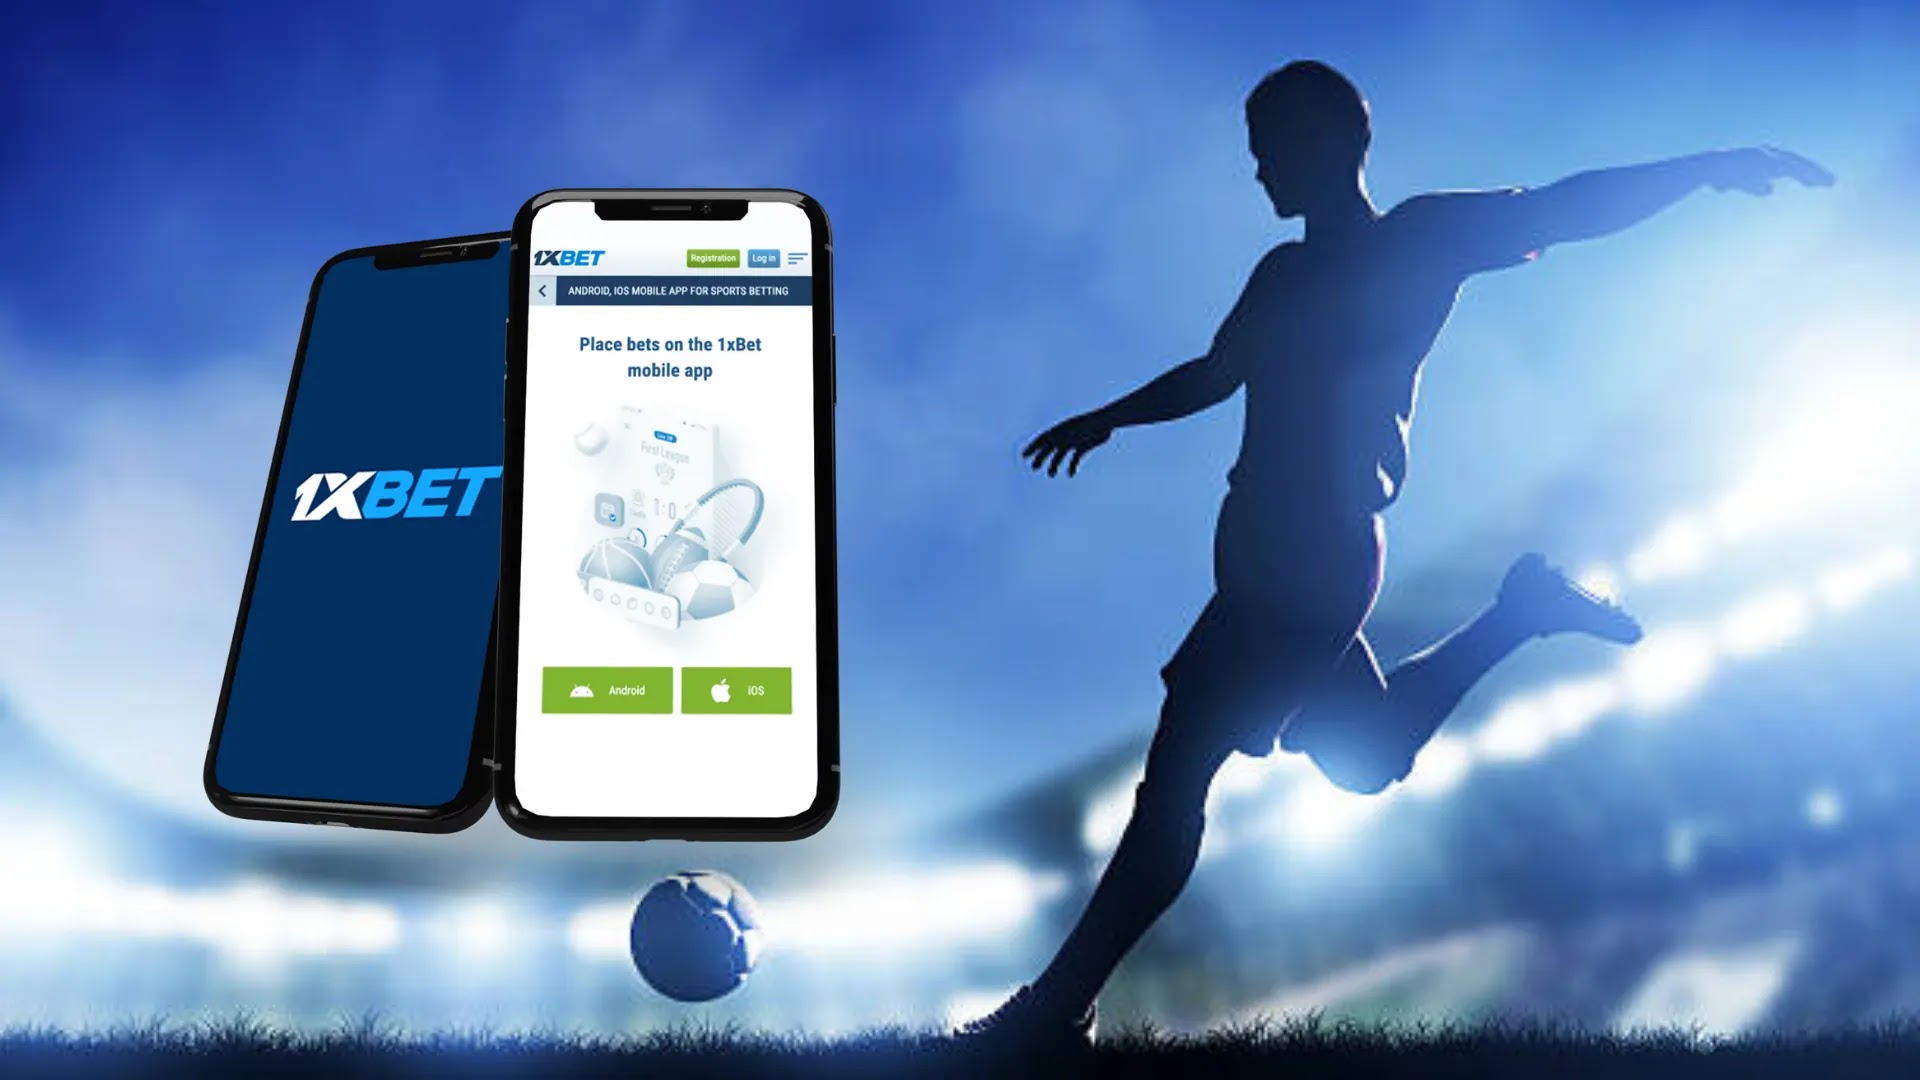 How to Download and Install the 1xBet App